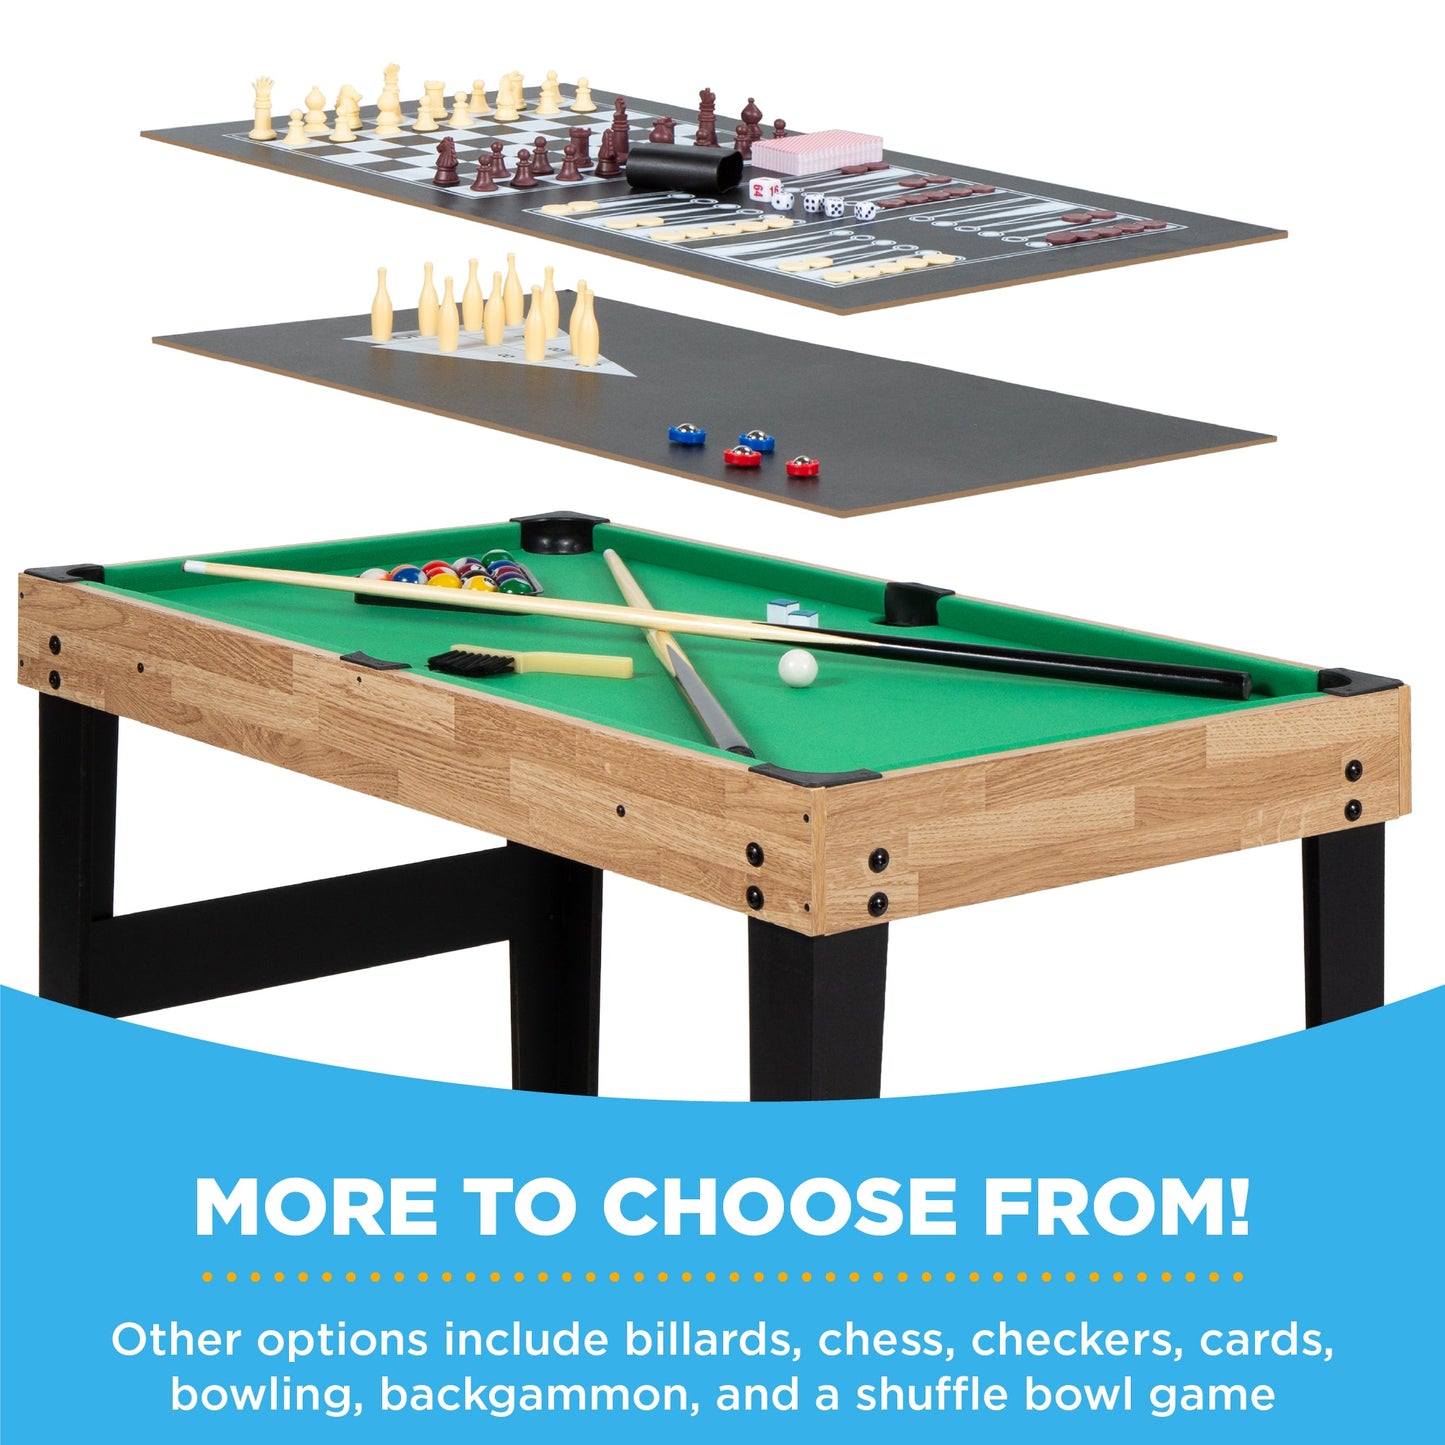 10-in-1 Combo Game Table Set w/ Pool, Foosball, Ping Pong, Chess - 2x4ft